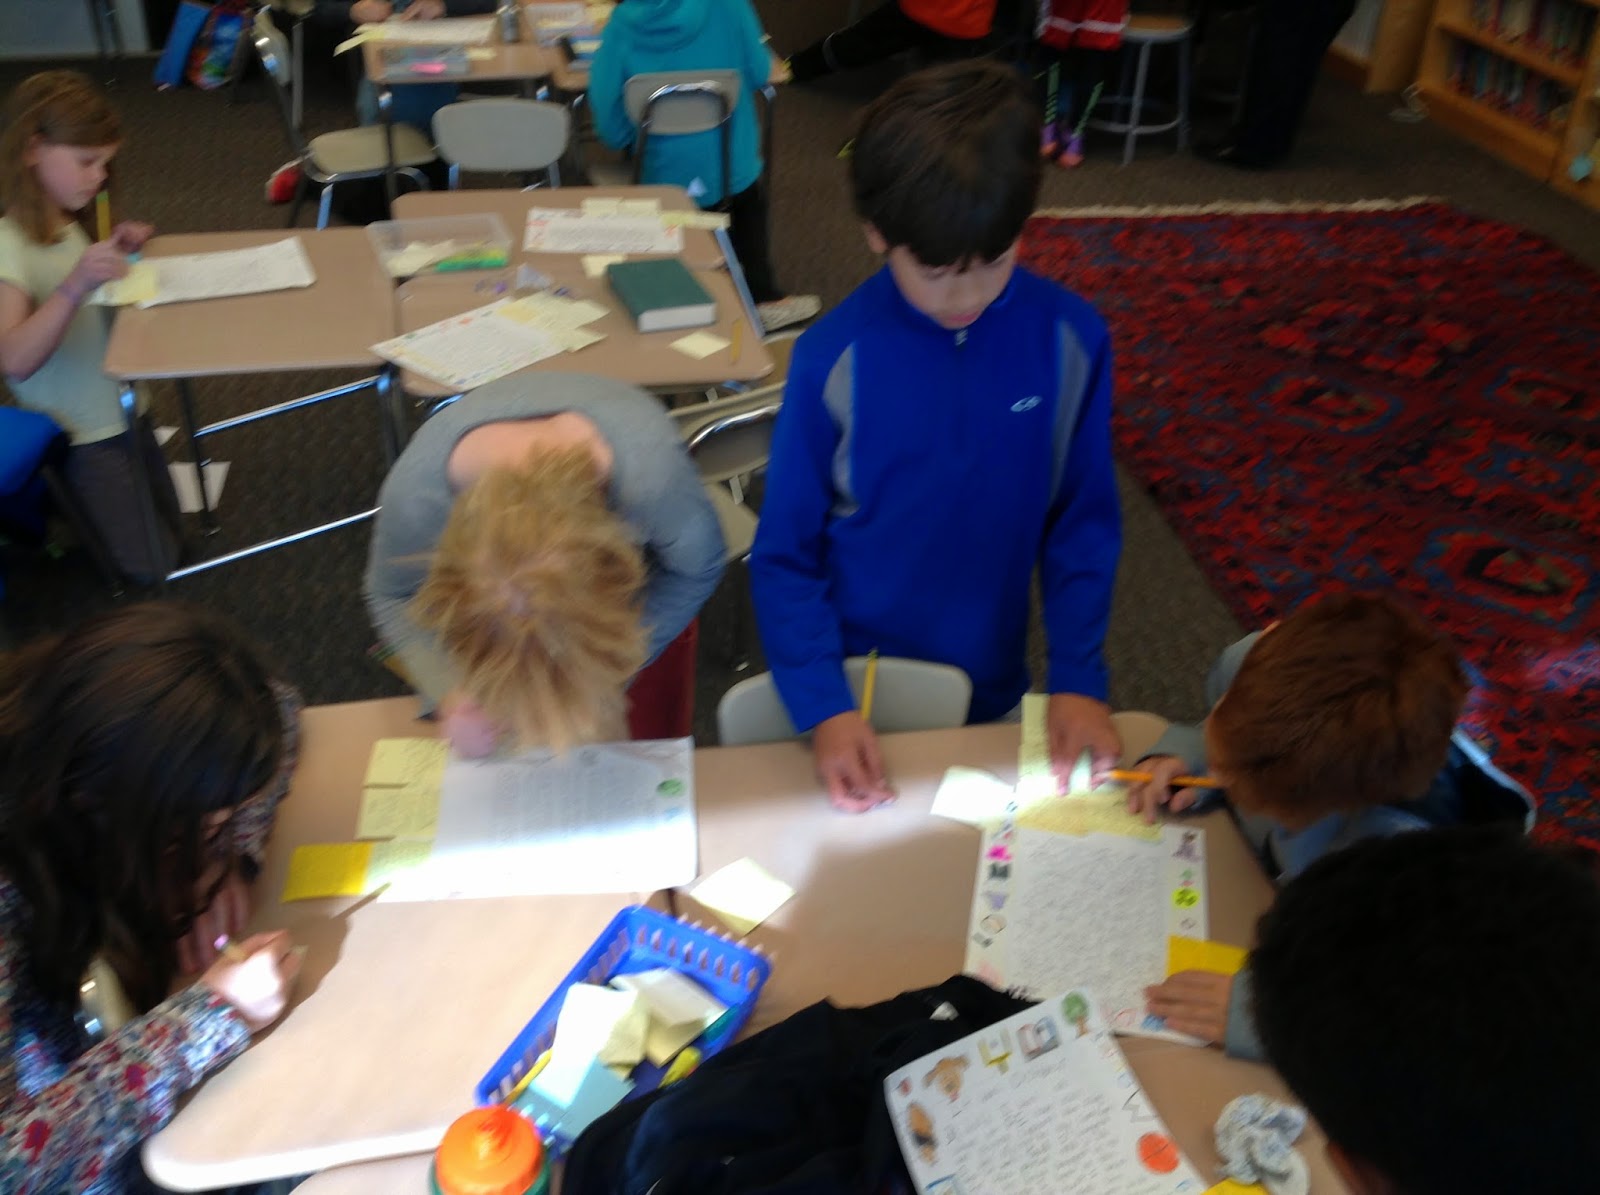 iPad and Learning Adventures at Lower School: Blogging about Blogging